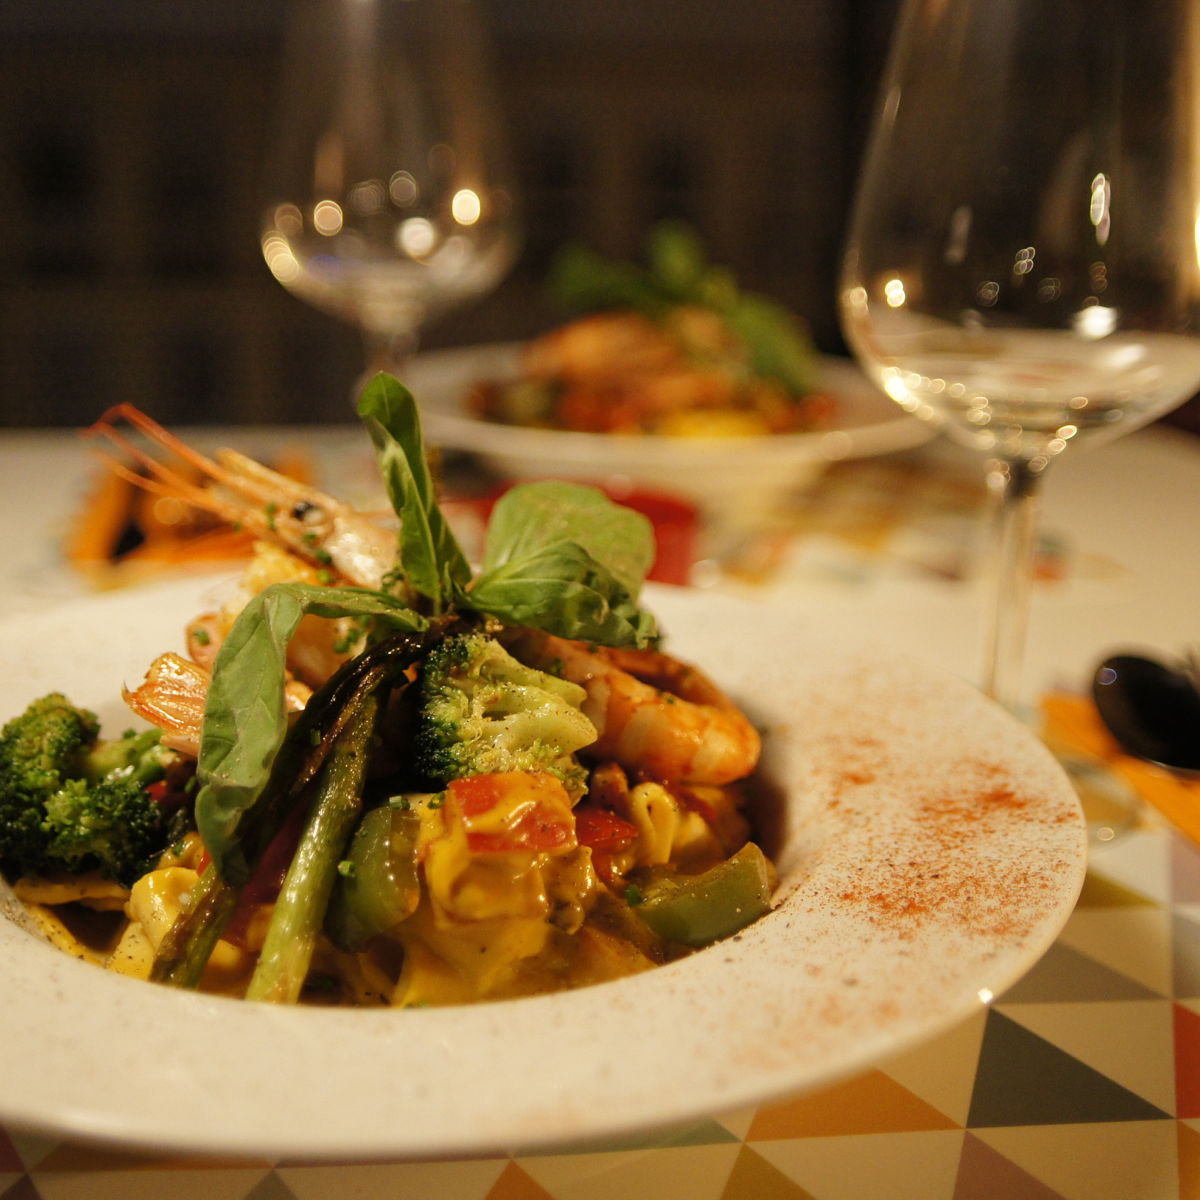 Gourmet menu and wine pairing from the heart of Seville.